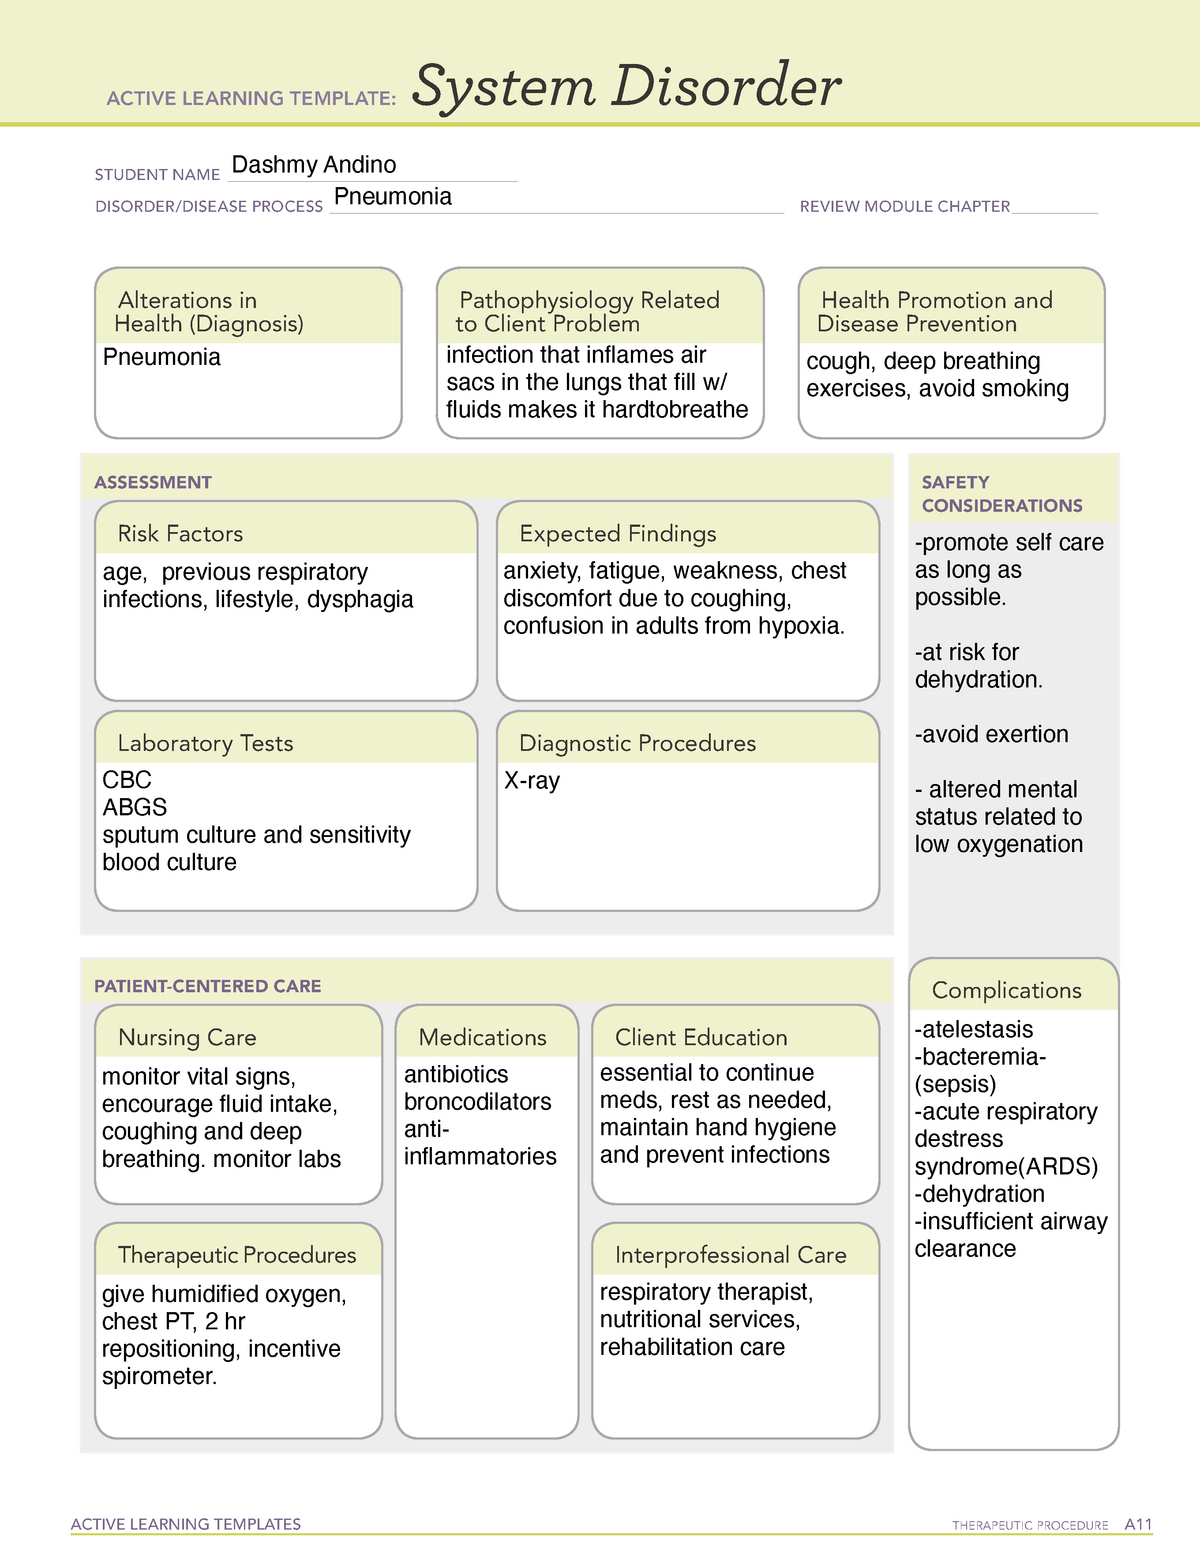 ativan-drug-card-for-maternity-clinical-active-learning-templates